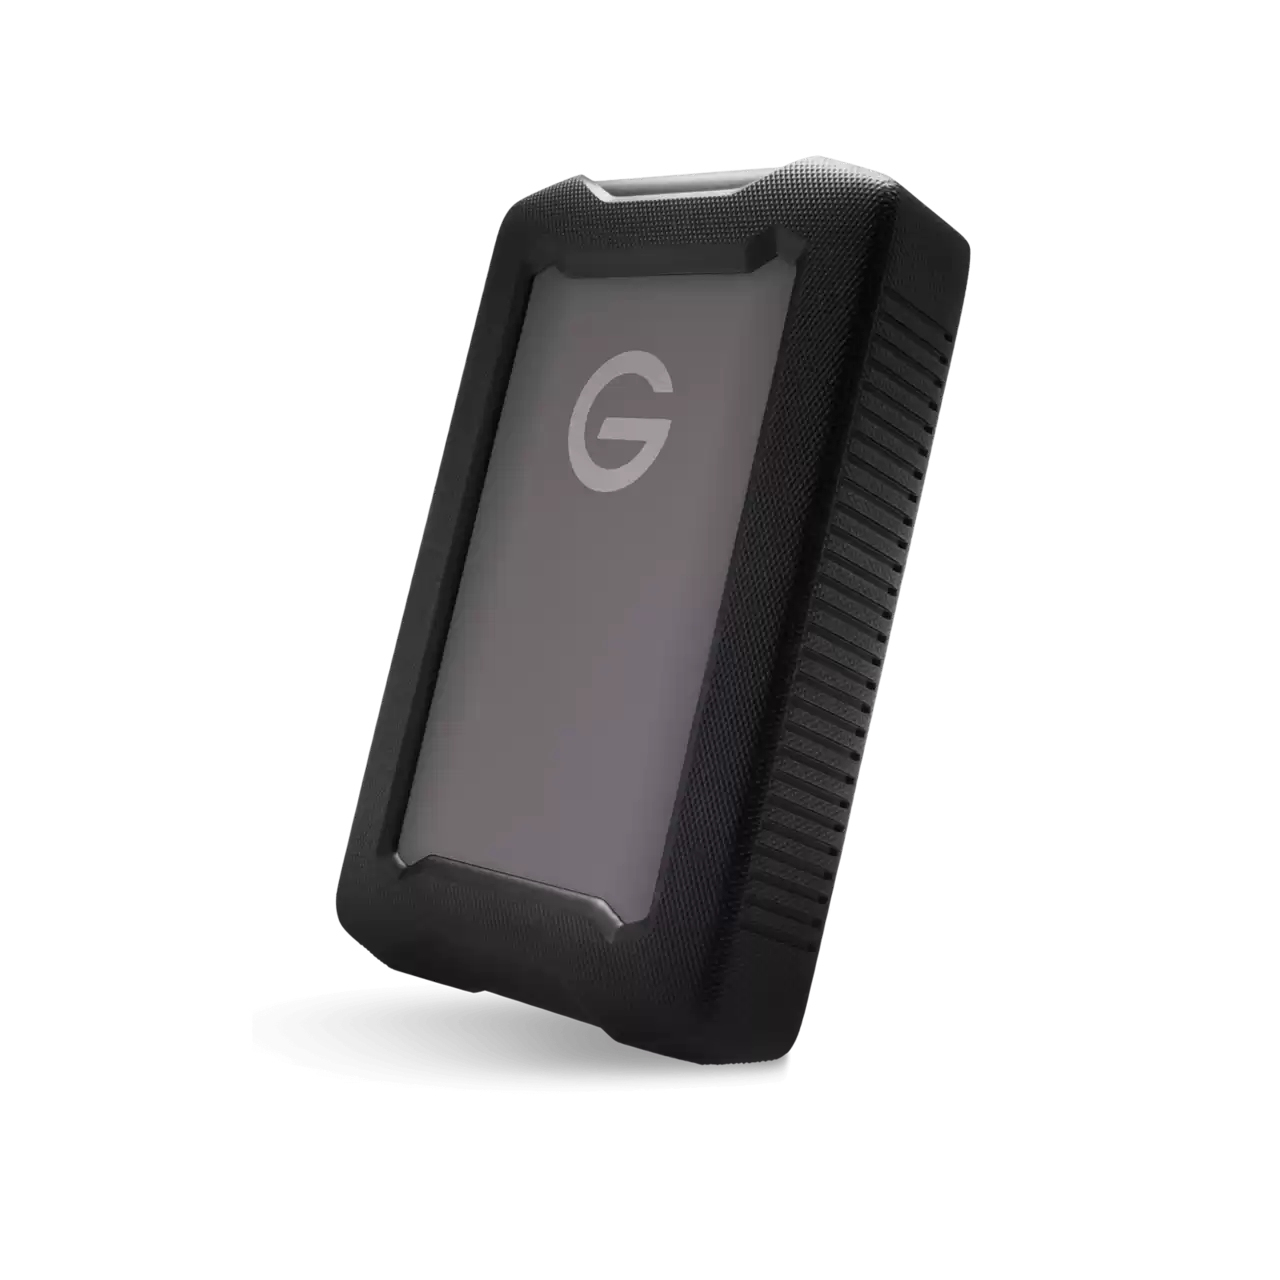  Professional G-DRIVE ArmorATD 5TB 2.5inch 140MB/s USB-C 5Gbps USB 3.2 Gen 1 Rugged portable external HDD - Space Grey